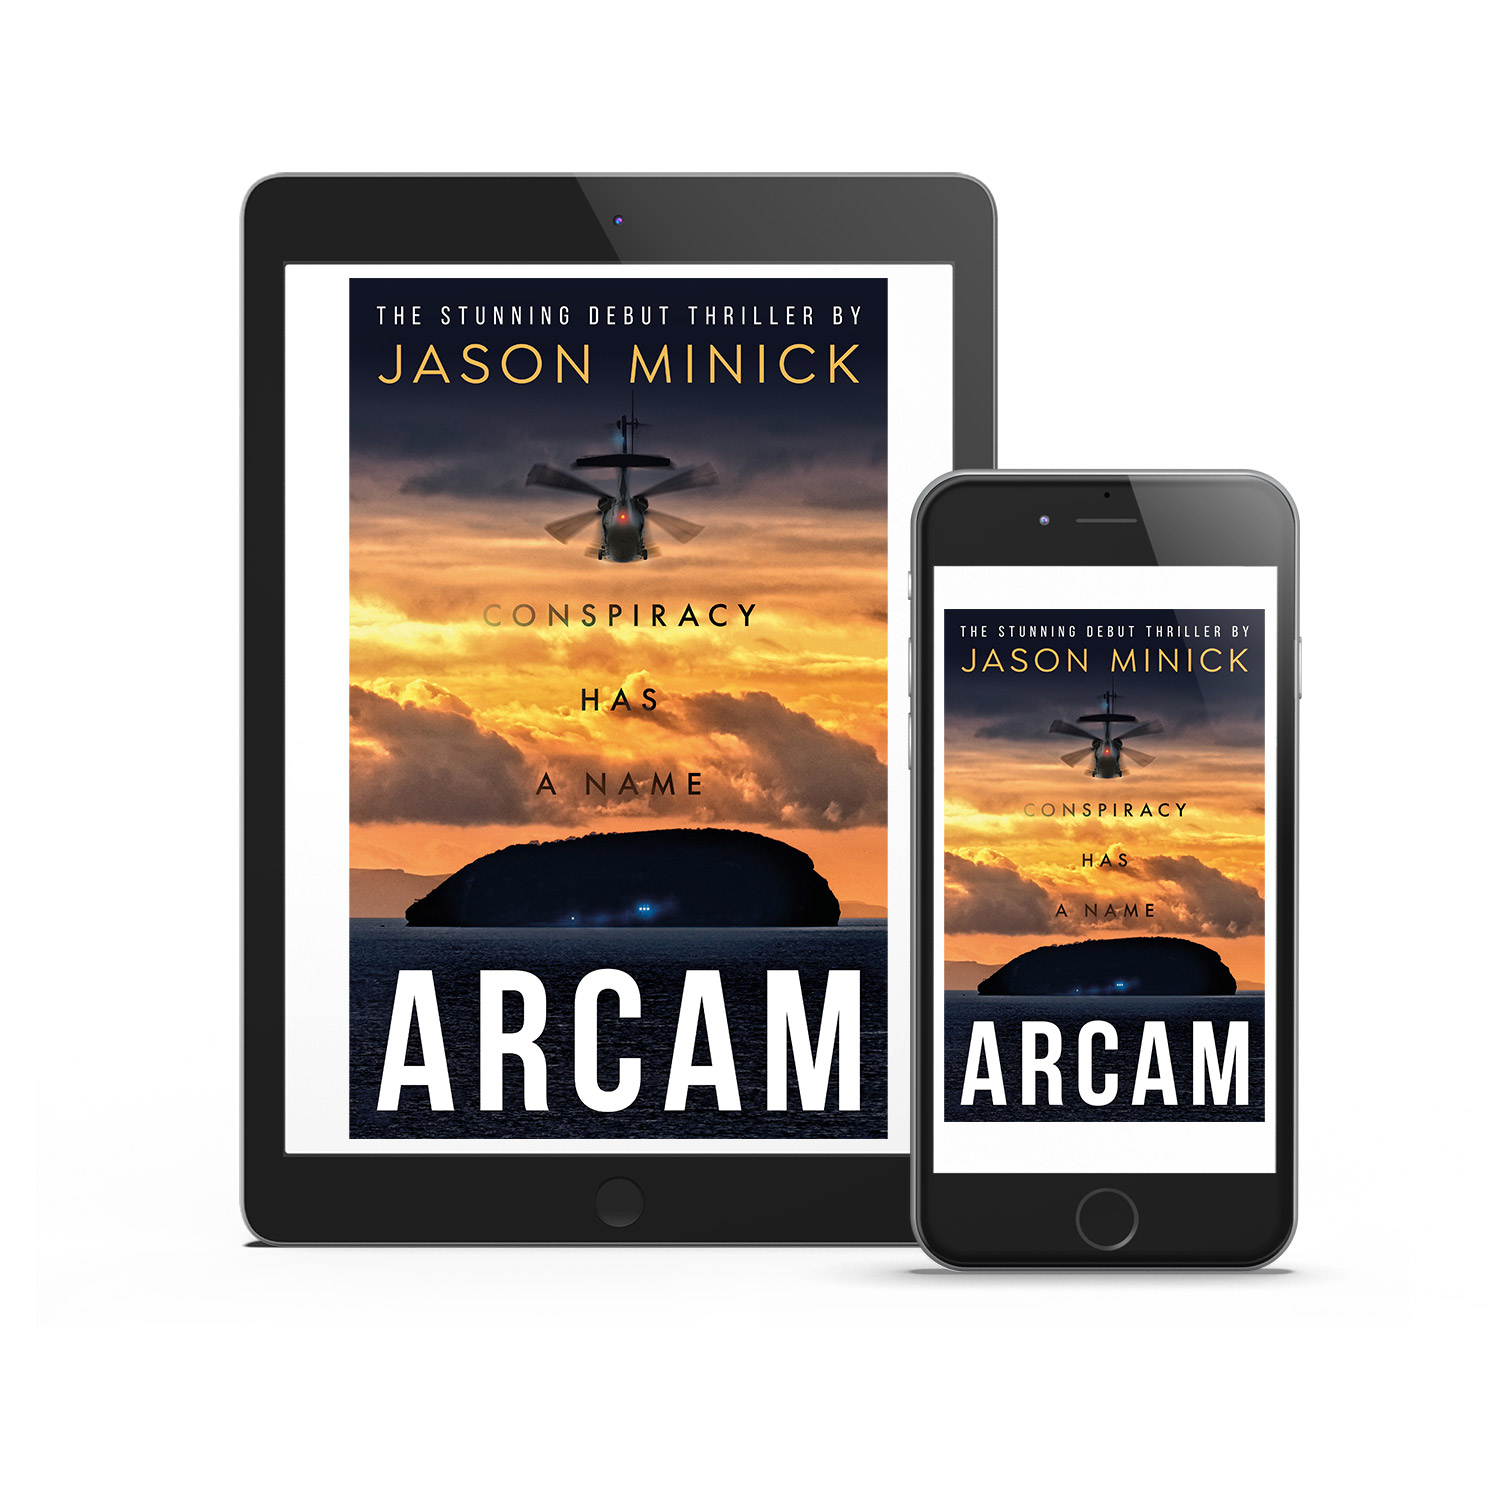 'ARCAM' is a mystery thriller on an epic scale, by Jason Minick. The book cover and interior were designed by Mark Thomas, of coverness.com. To find out more about my book design services, please visit www.coverness.com.